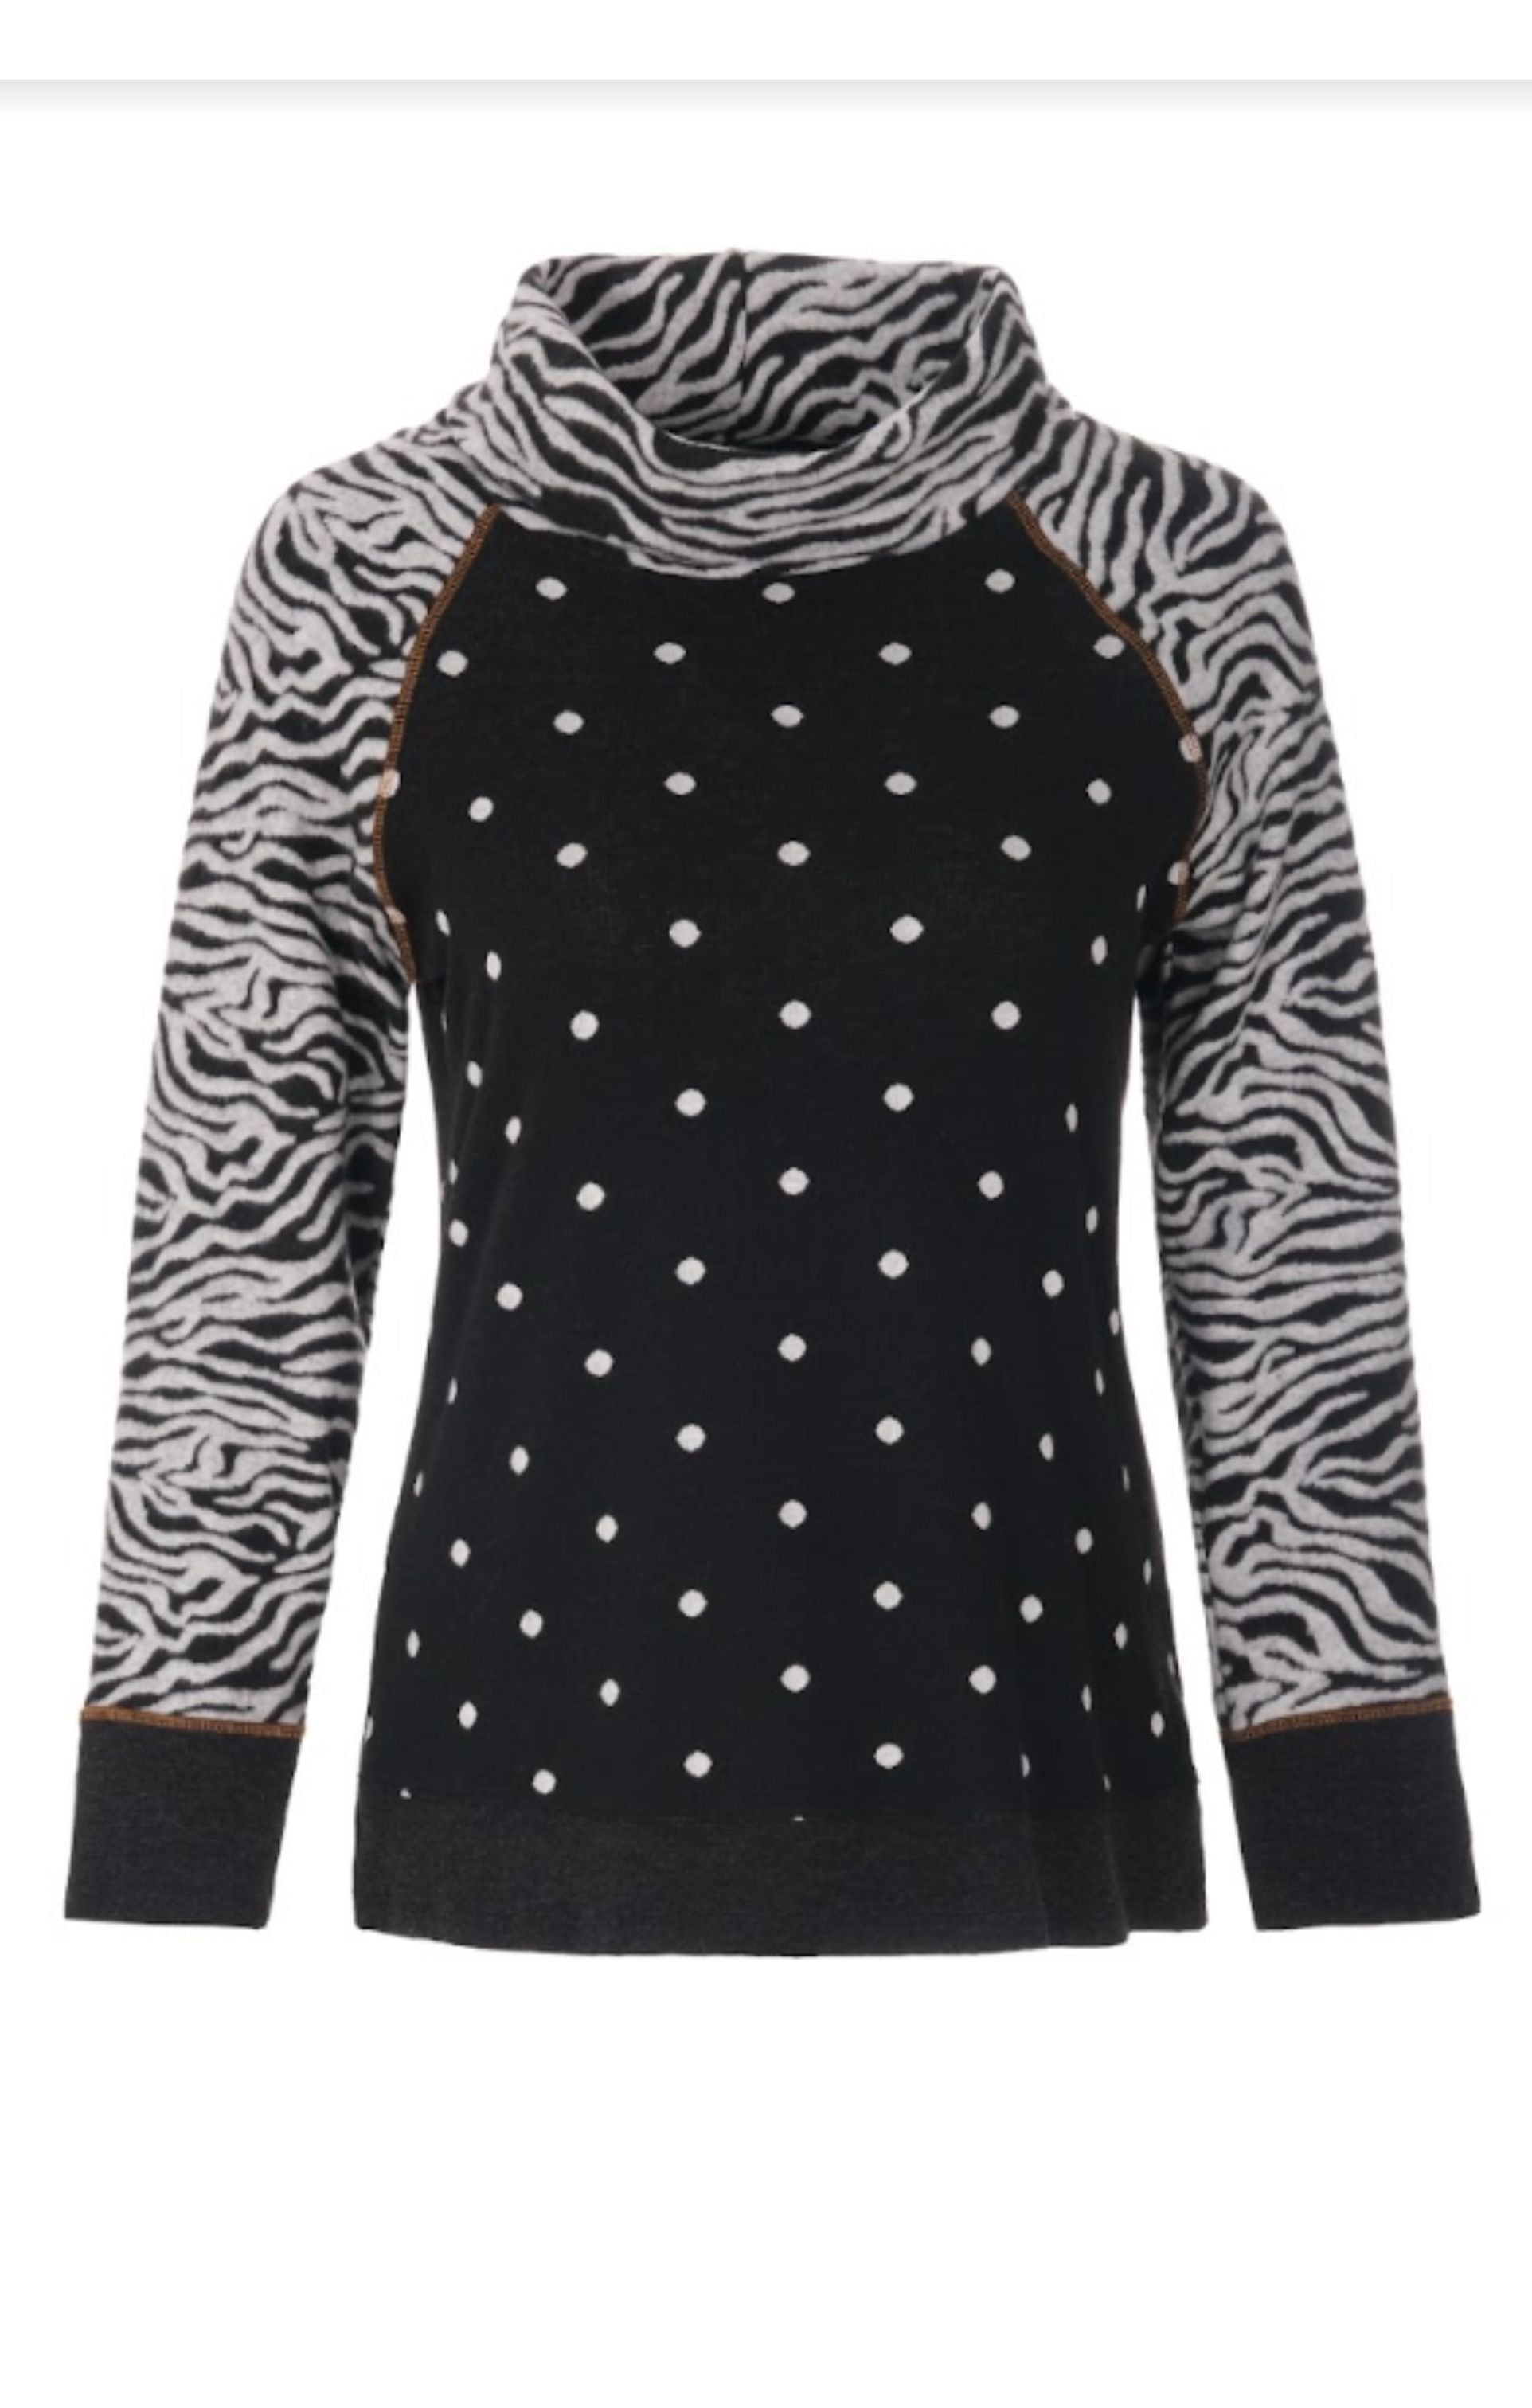 DOLCEZZA - ZEBRA JUMPER WITH DOTS - 72100- LAST ONE